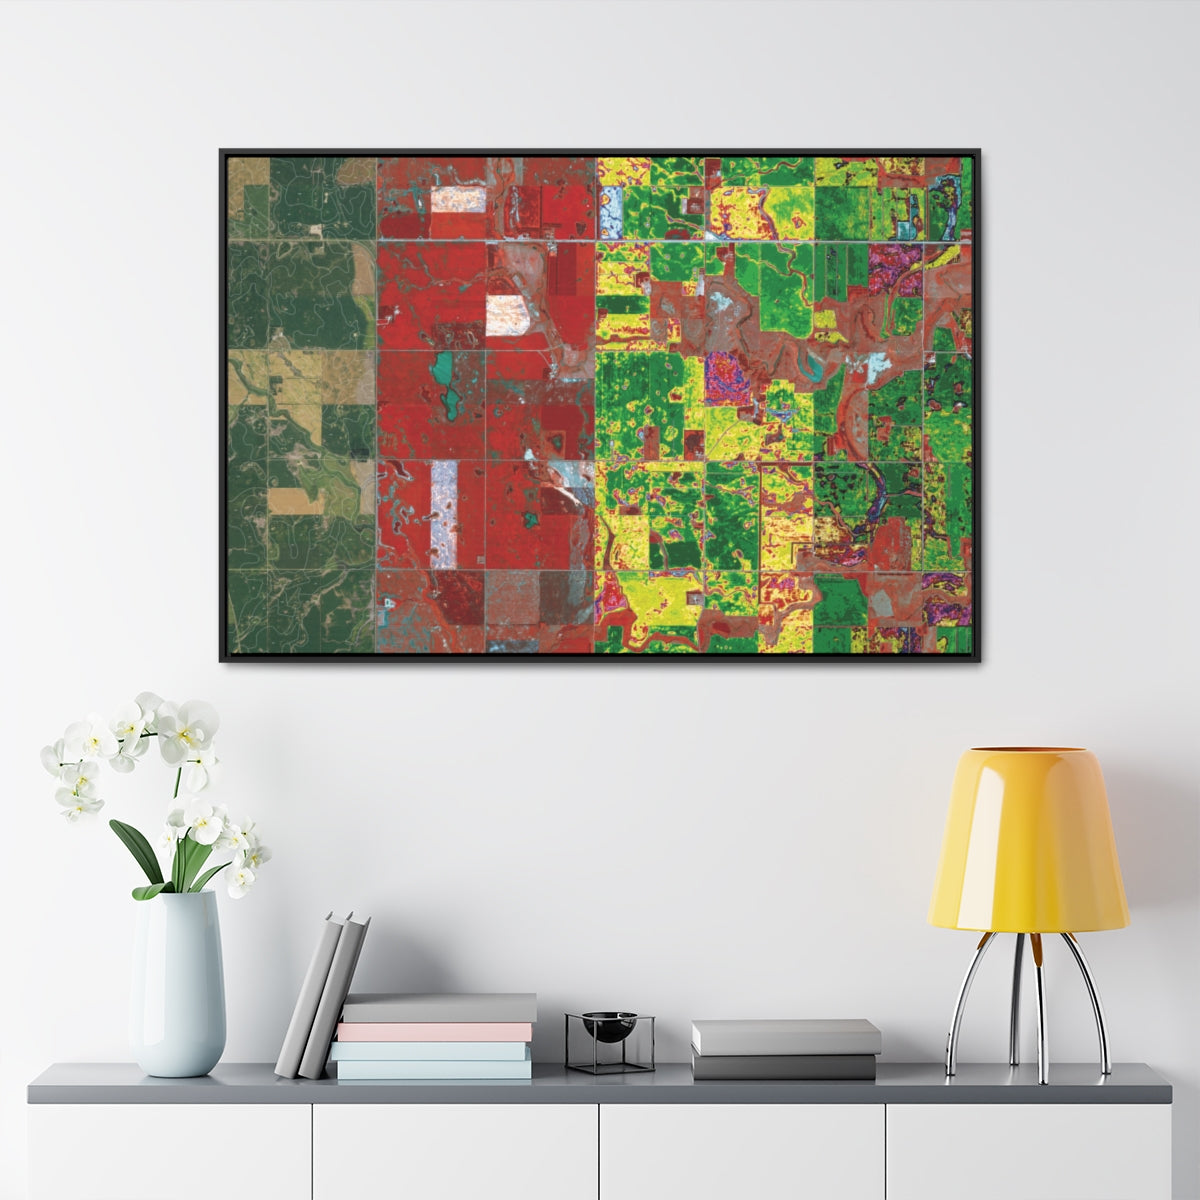 Guggenheim Satellite Imagery Framed Canvas Art from Countryside/The Future Exhibition